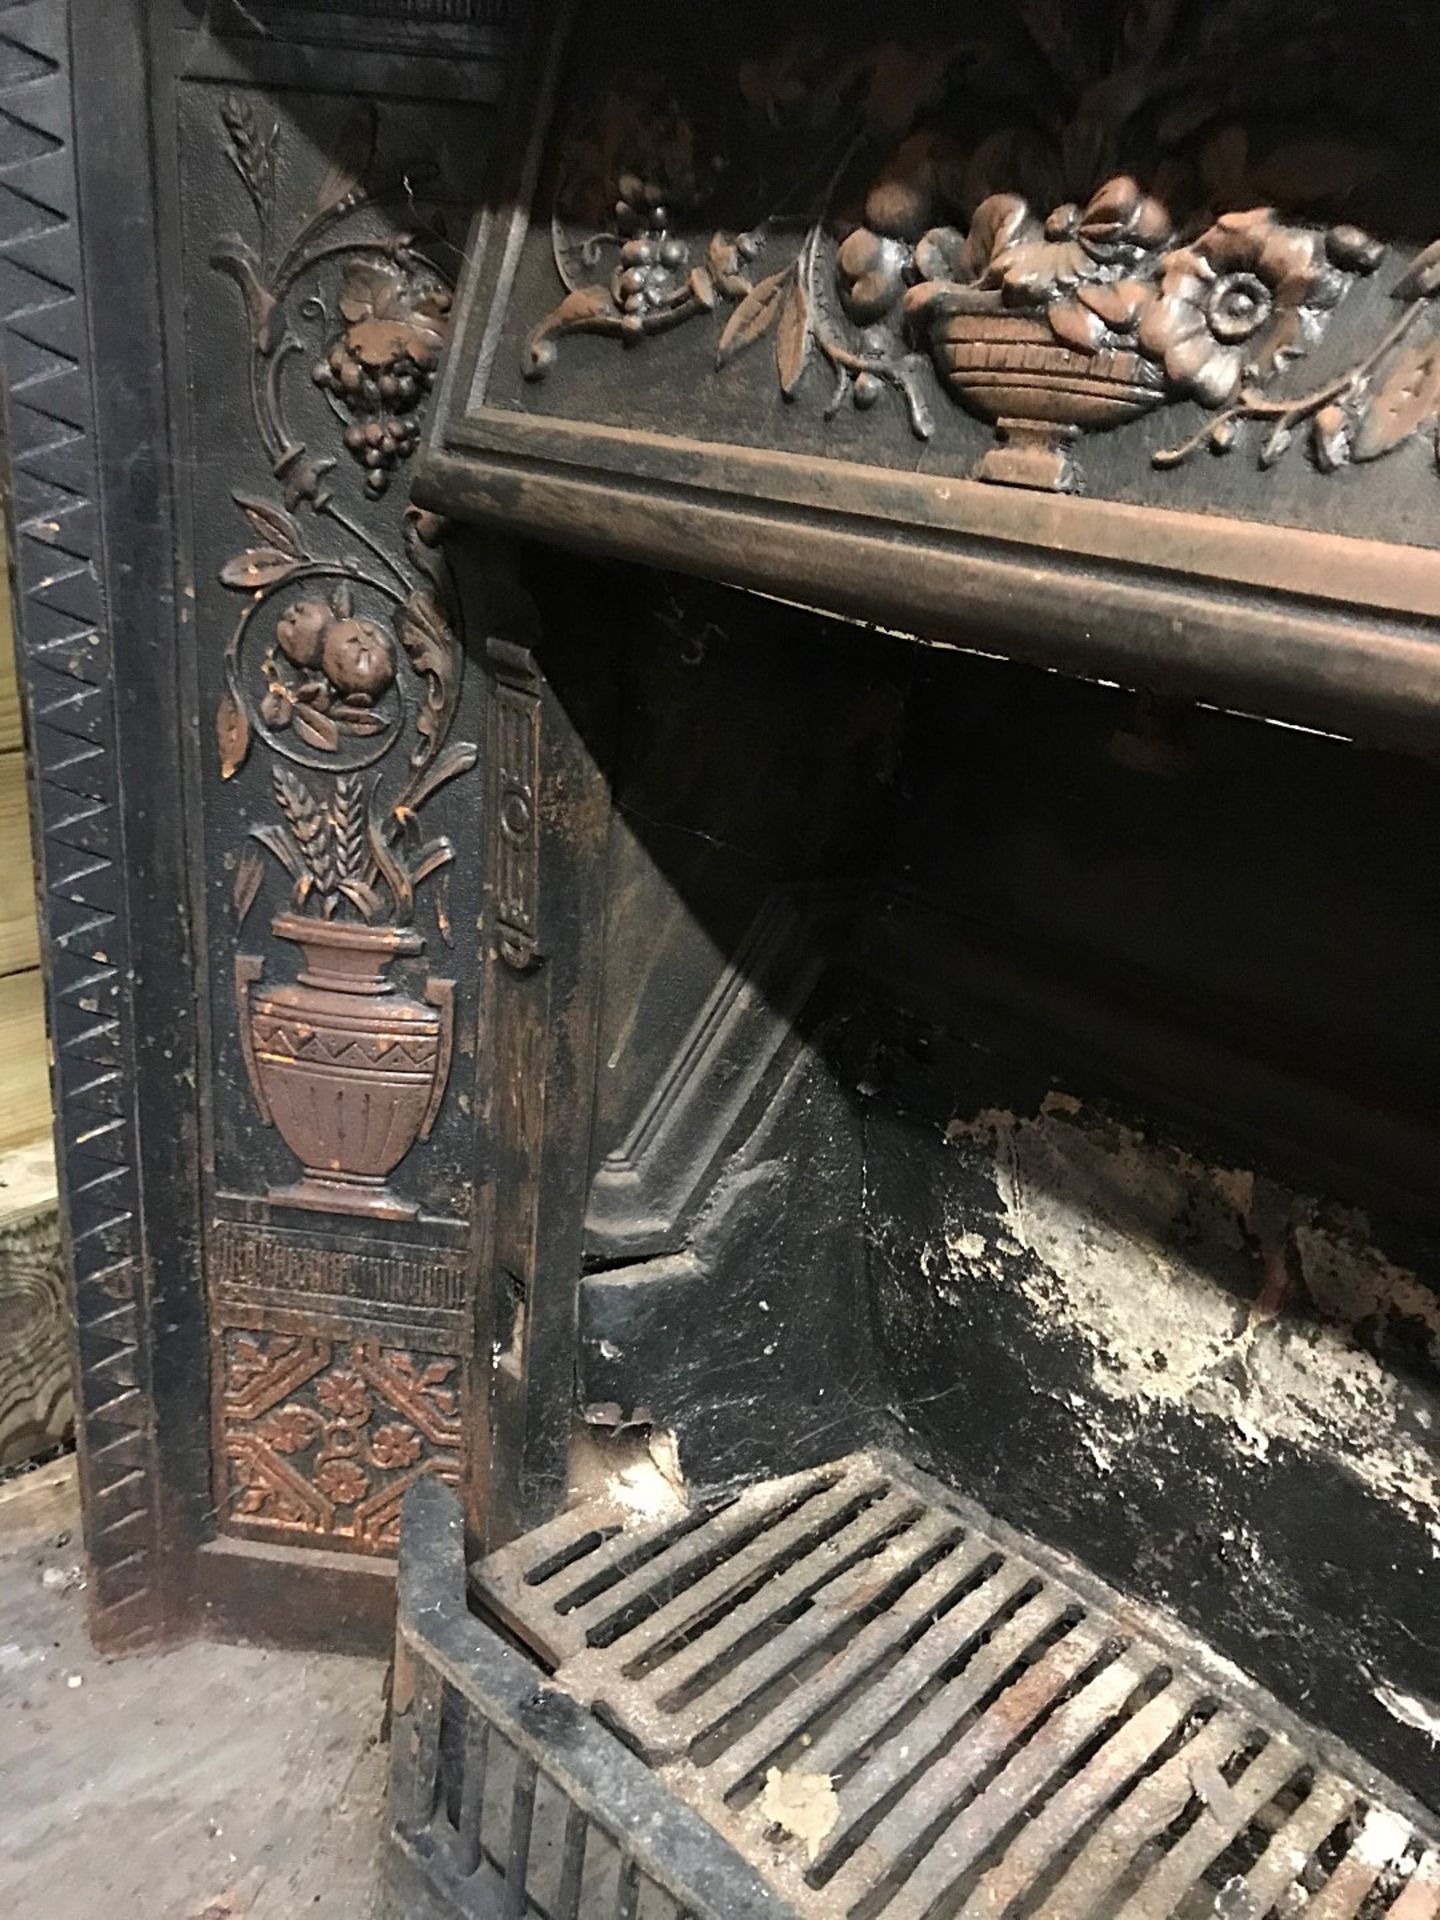 1 x Ultra Rare Stunning Antique Victorian Cast Iron Fire Insert With Ornate Cast Iron Tiles To - Image 5 of 5